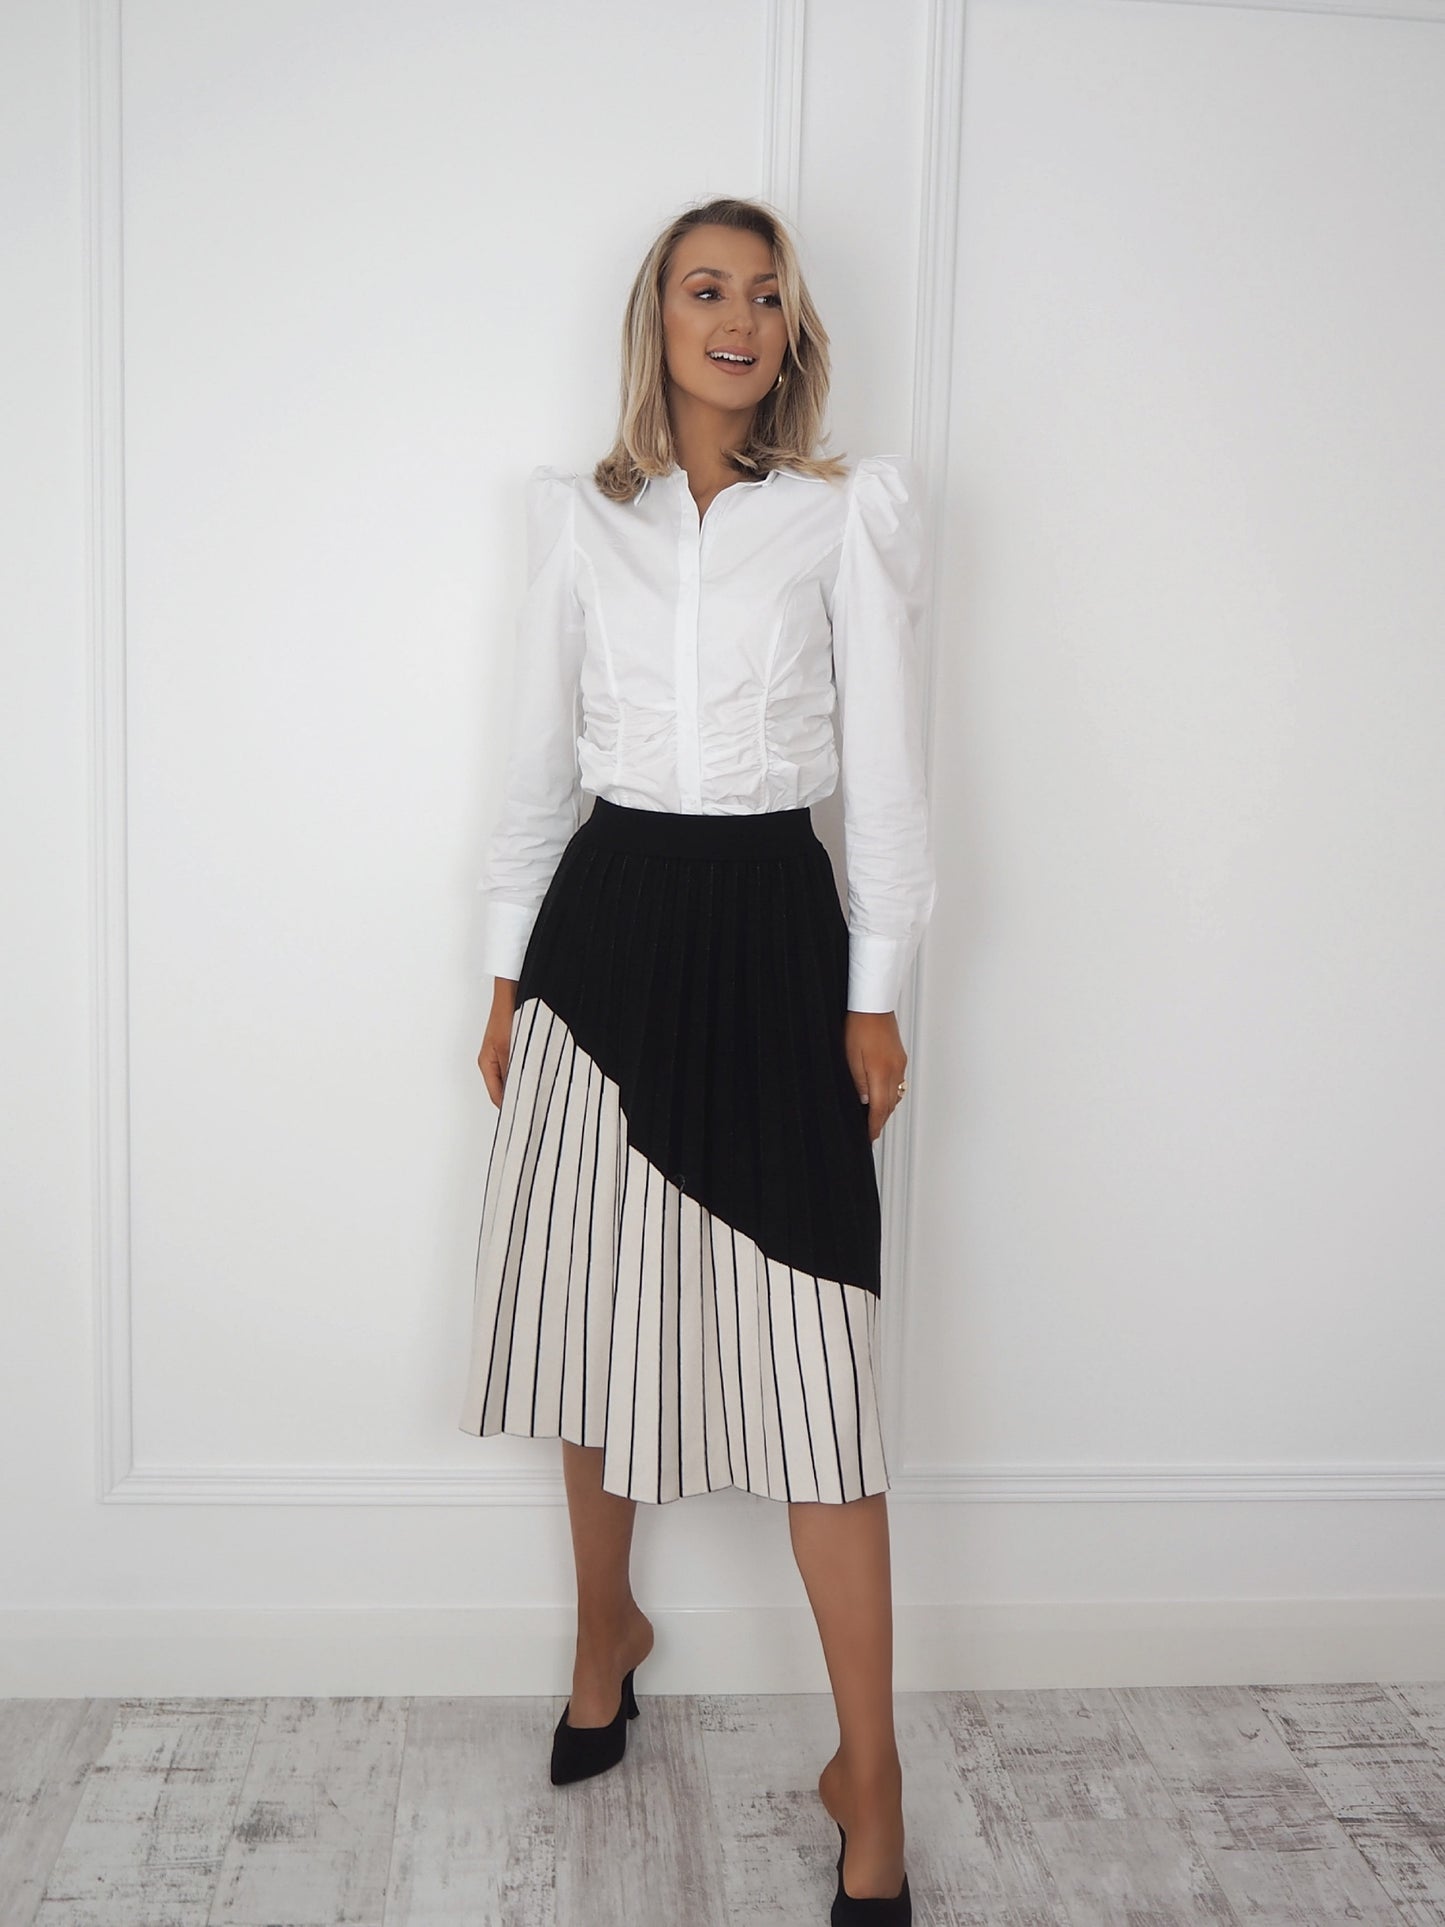 Black and White Abstract Print Pleated Skirt